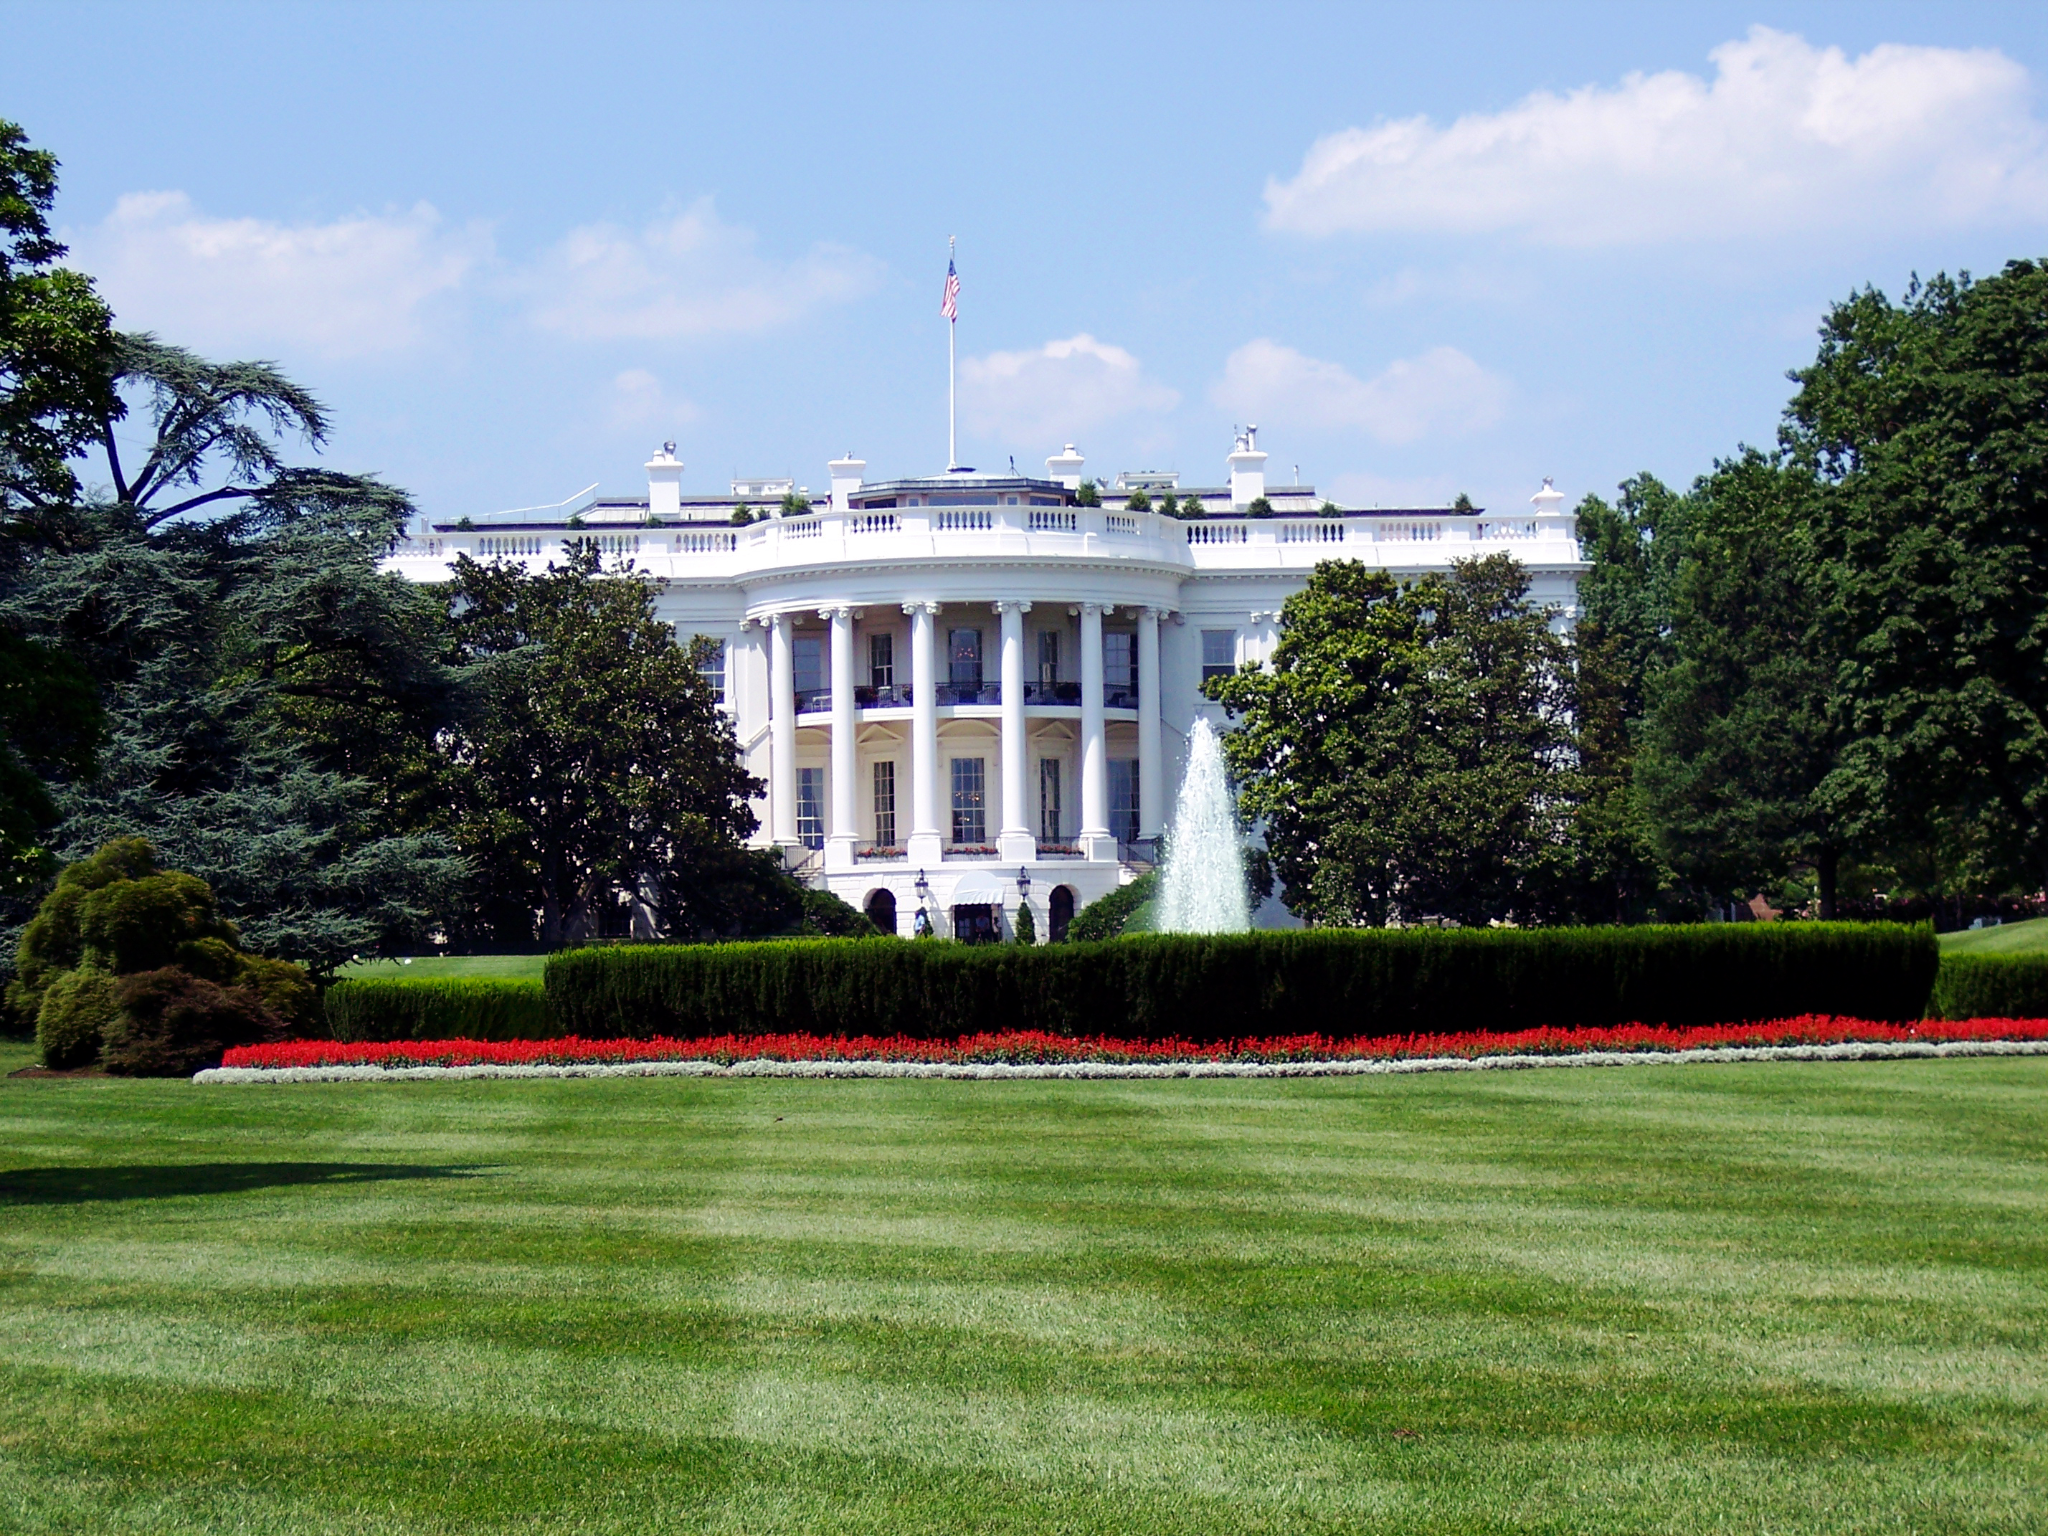 Photo of the front facade of the White House.